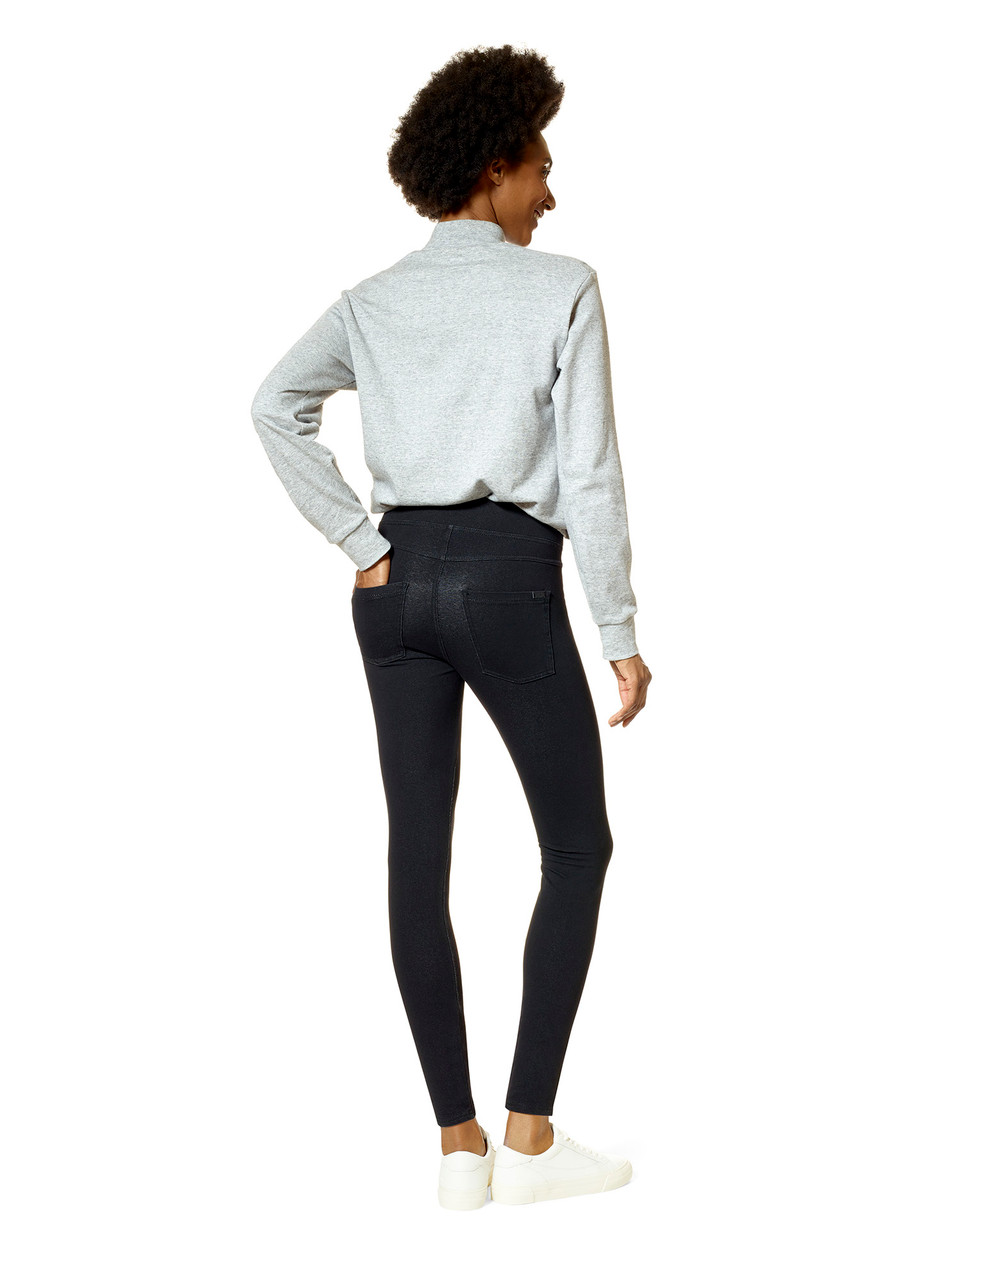 New year, new hue? Score 50% off Fashion Color Leggings while you